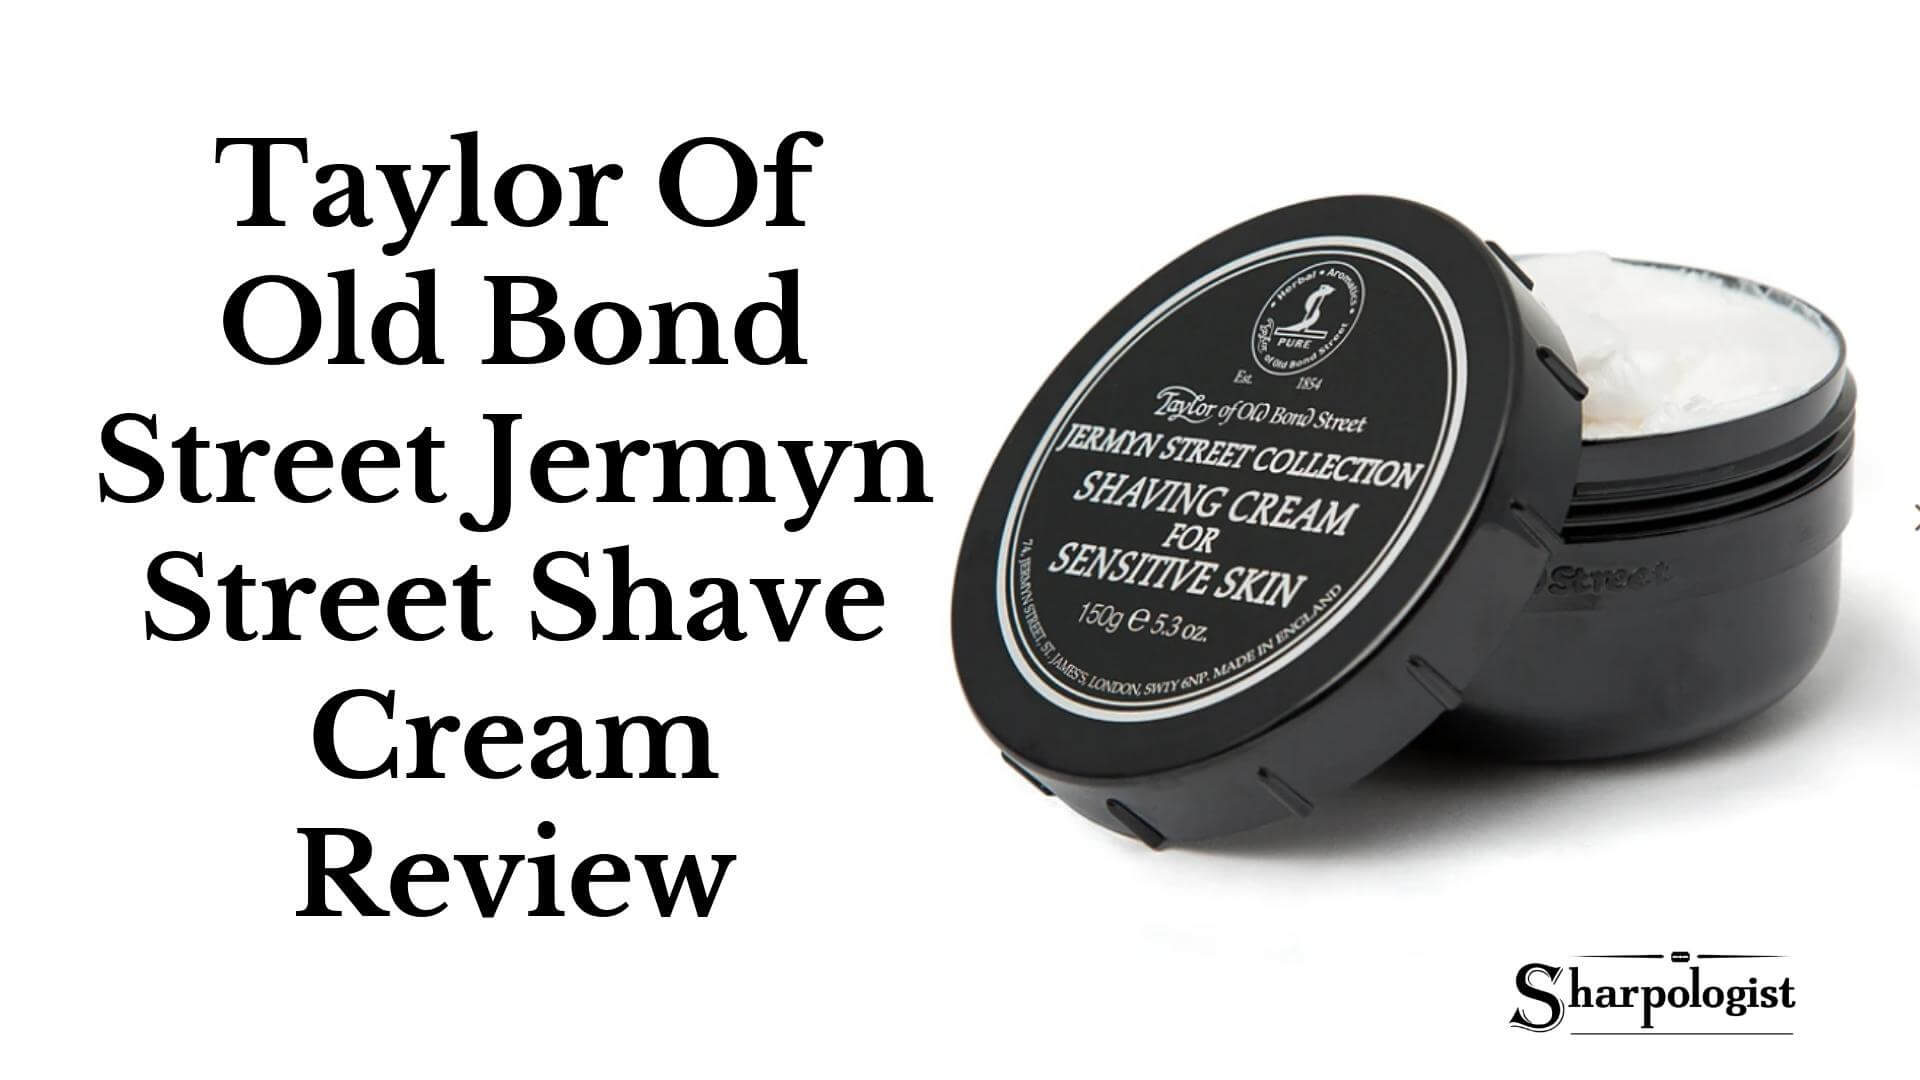 Taylor Of Old Bond Shave Review Street Cream Jermyn Street